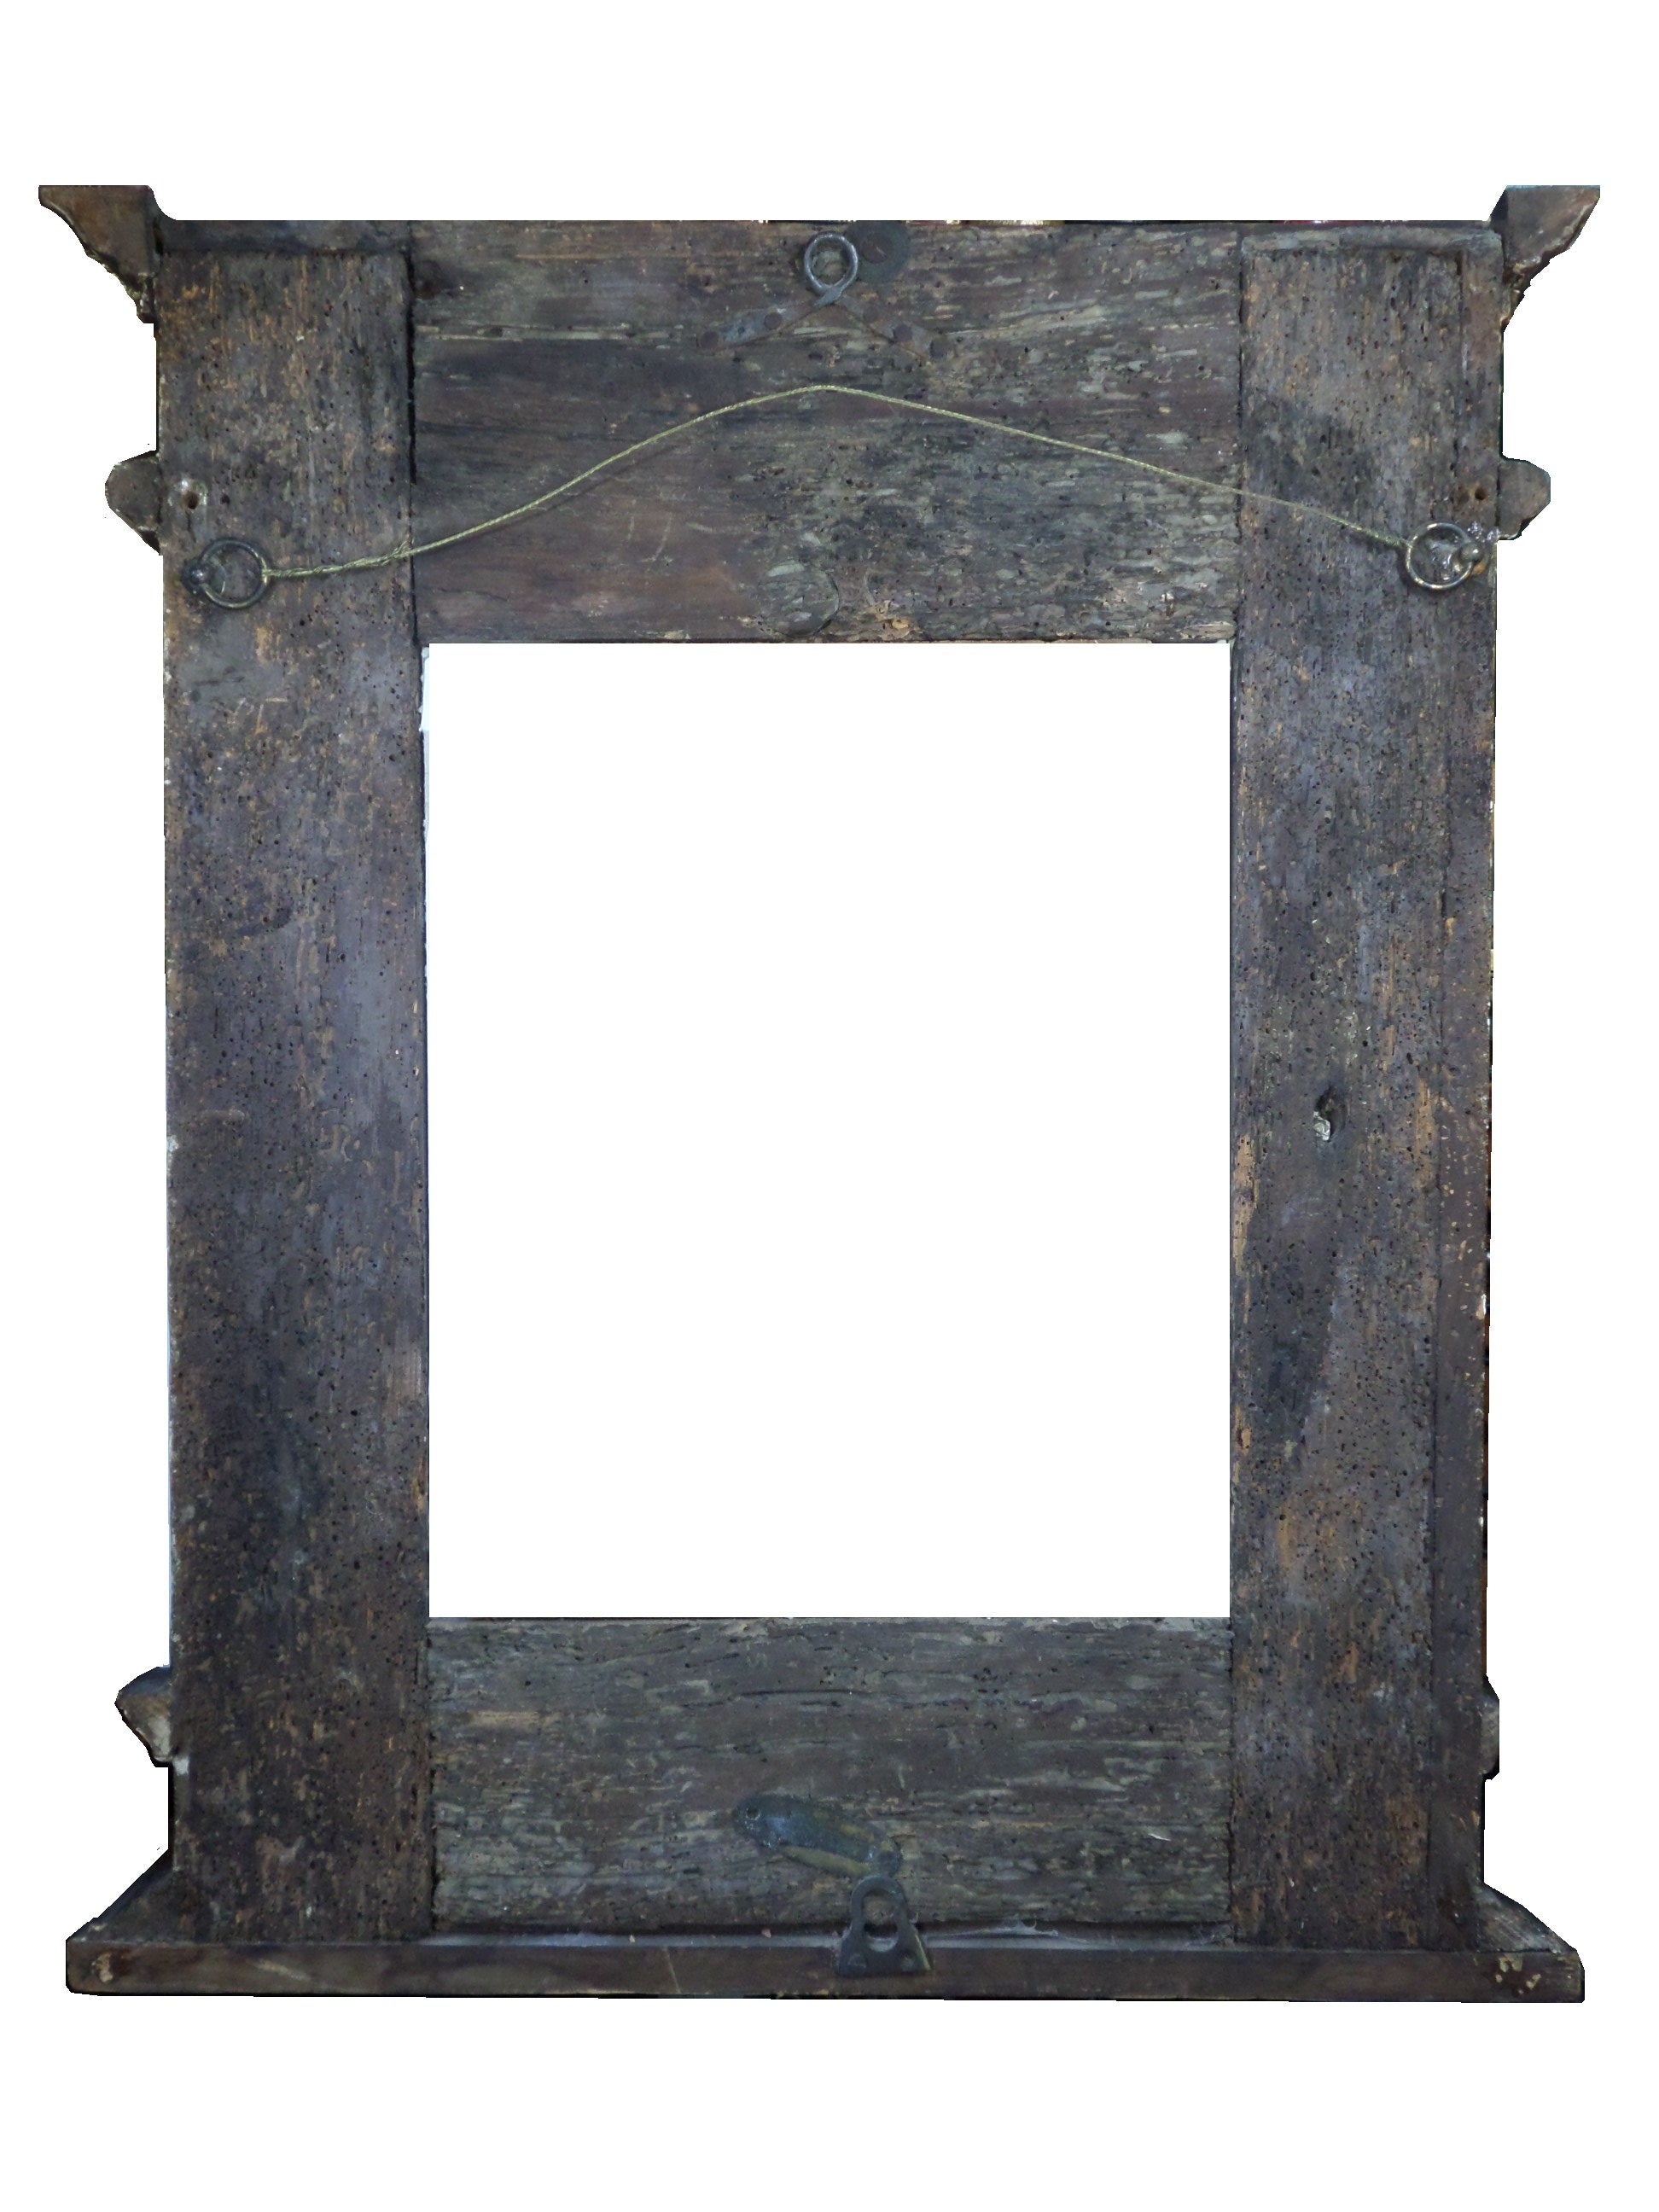 ANTIQUE 18TH CENTURY ITALIAN SCHOOL TABERNACLE PICTURE FRAME